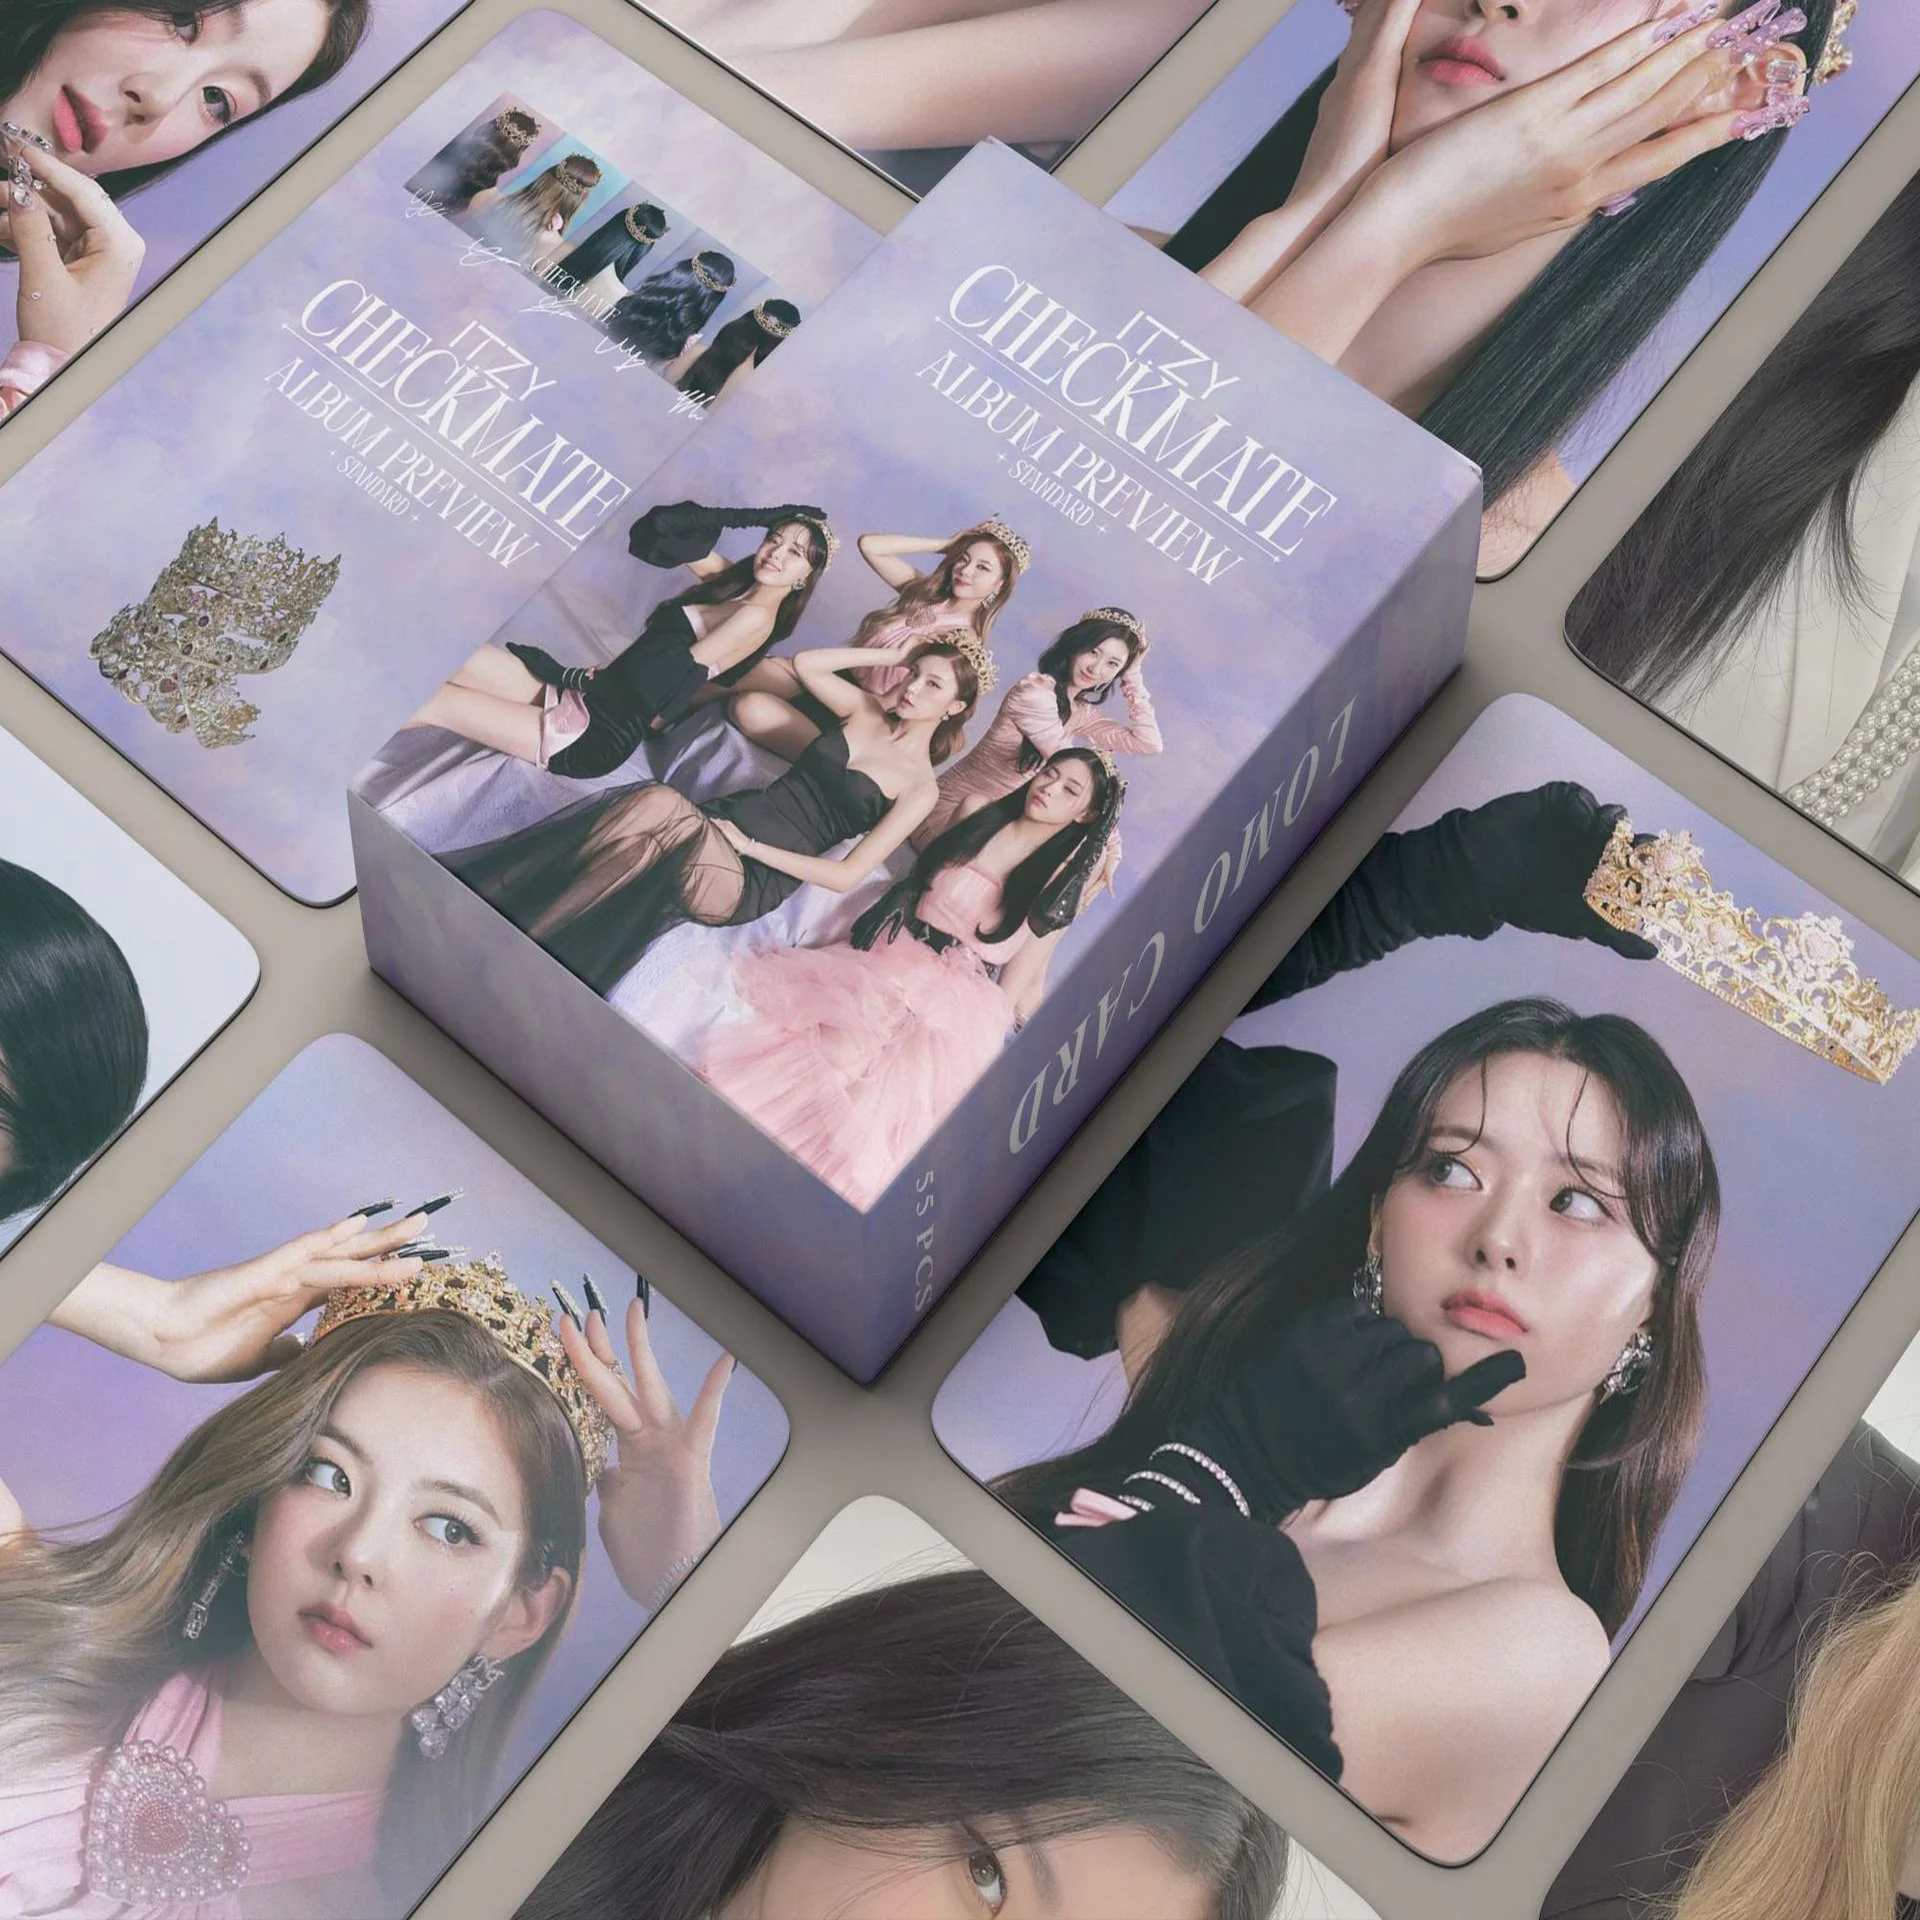 55pcs/set Kpop ITZY CHECKMATE BEST FRIENDS FOREVER Lomo Cards Greeting Season Photo album Cards Photocard Postcard Fashion hot kpop album photo card bangtan boys collection photocard self made paper cards lomo cards postcard self made photo fan gift